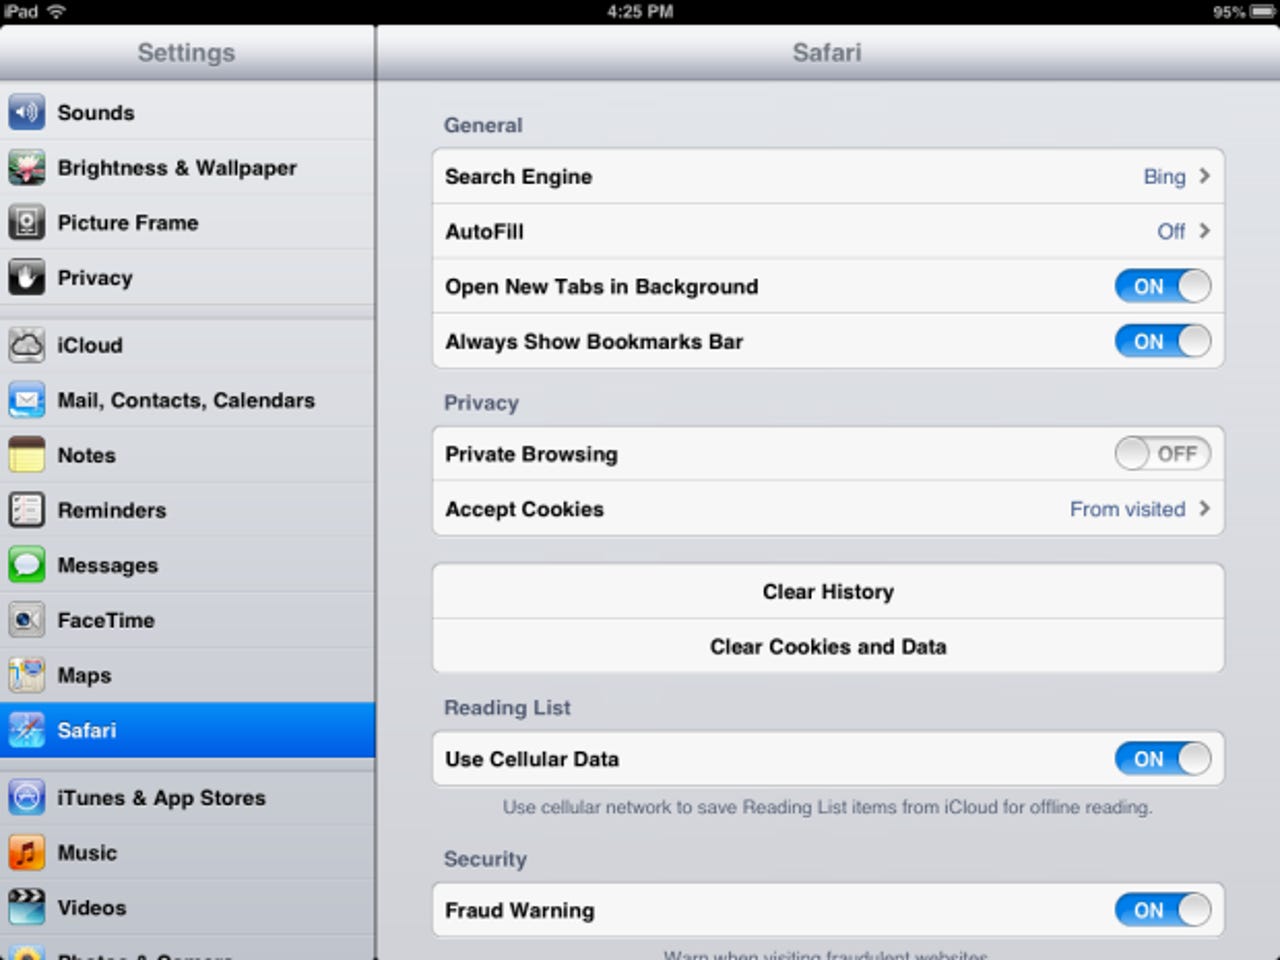 iOS 6 and stealth DNT support